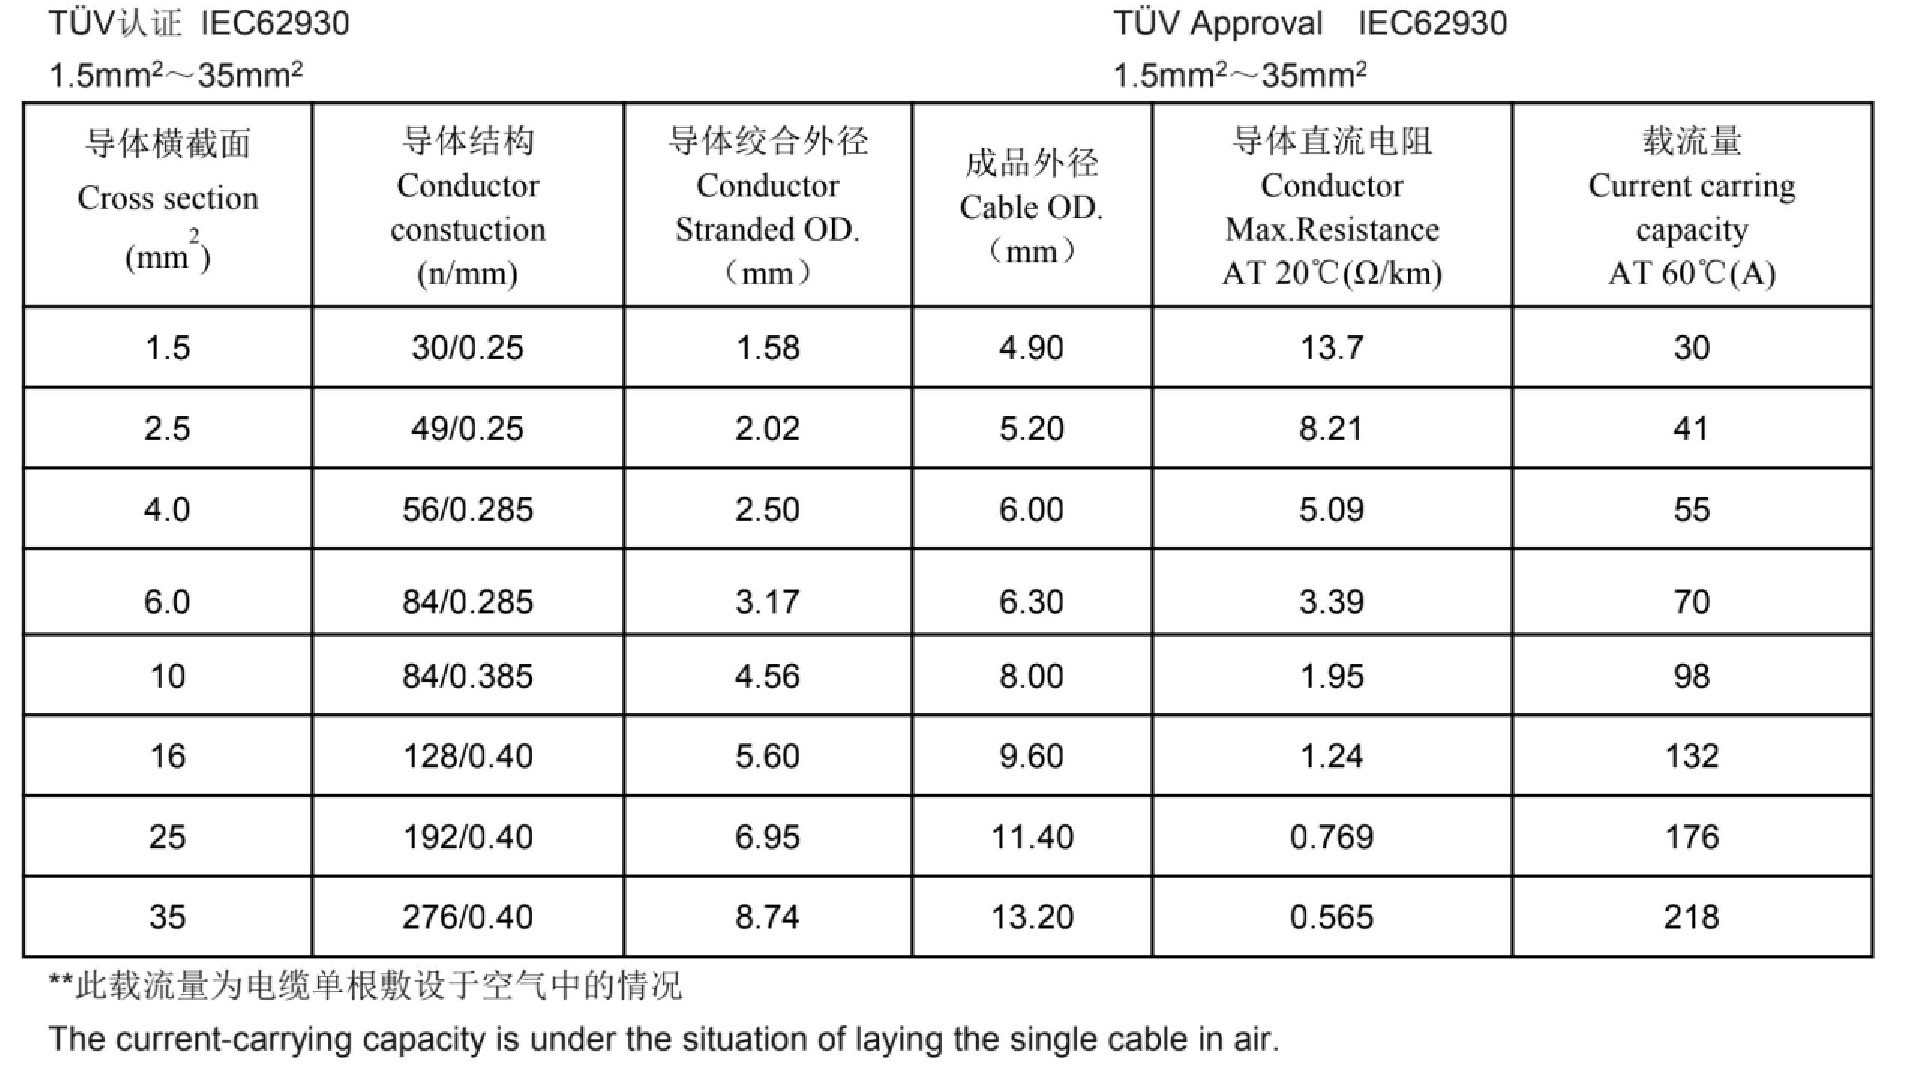 6mm2 twin core solar cable IEC62930 specification